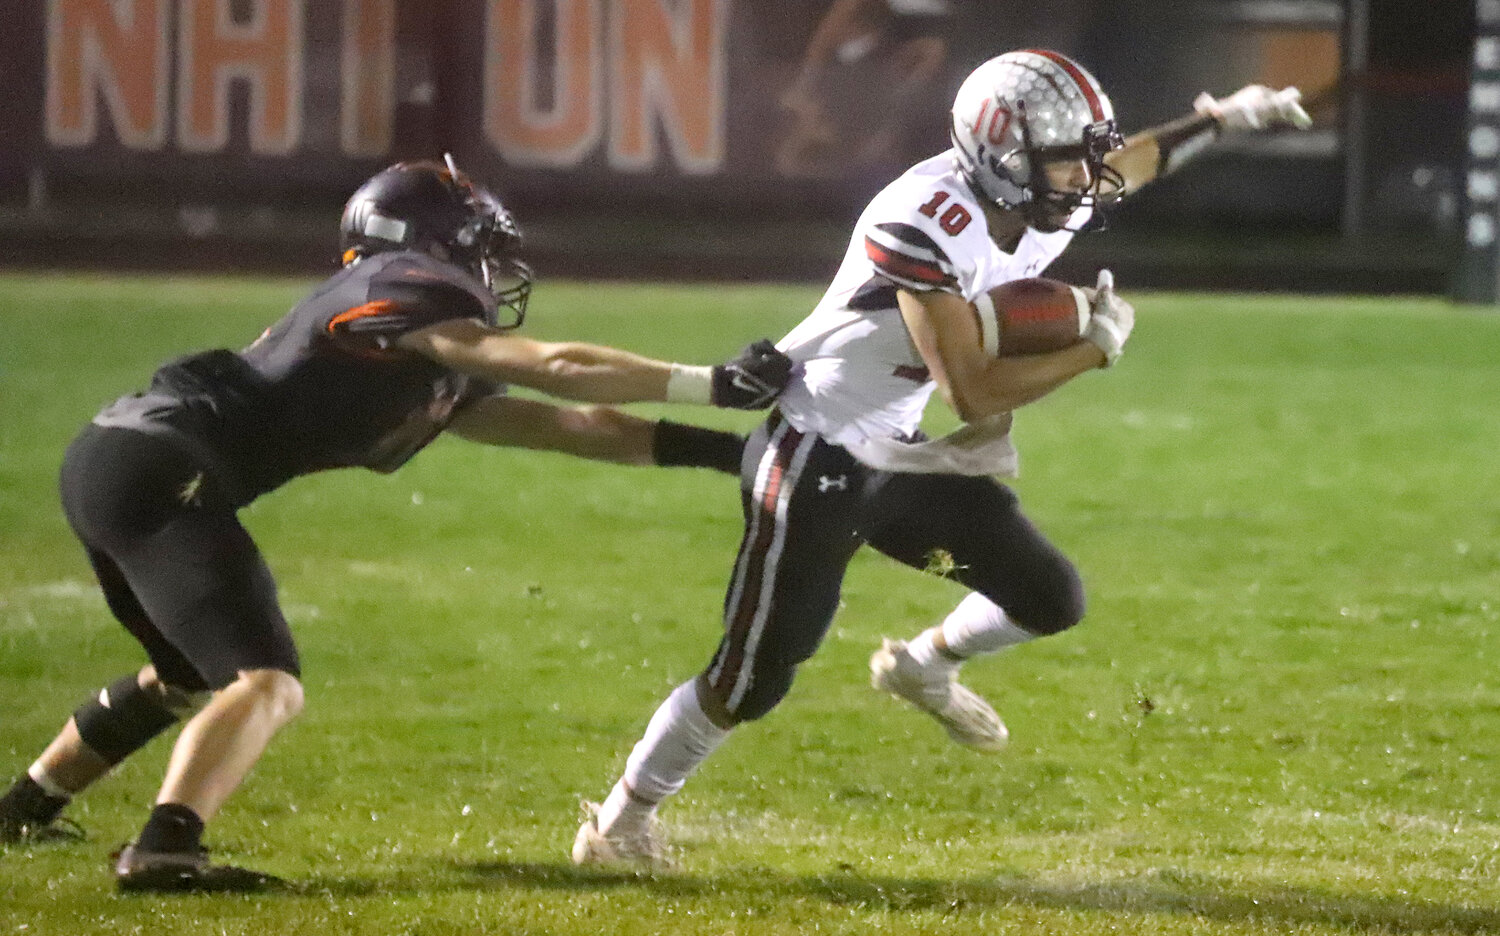 Senior Leif Boeding tries to pull away from would-be tackler after pulling in a screen pass from Marcus Guzman. Boeding would finish with 40 yards on three catches in the win.